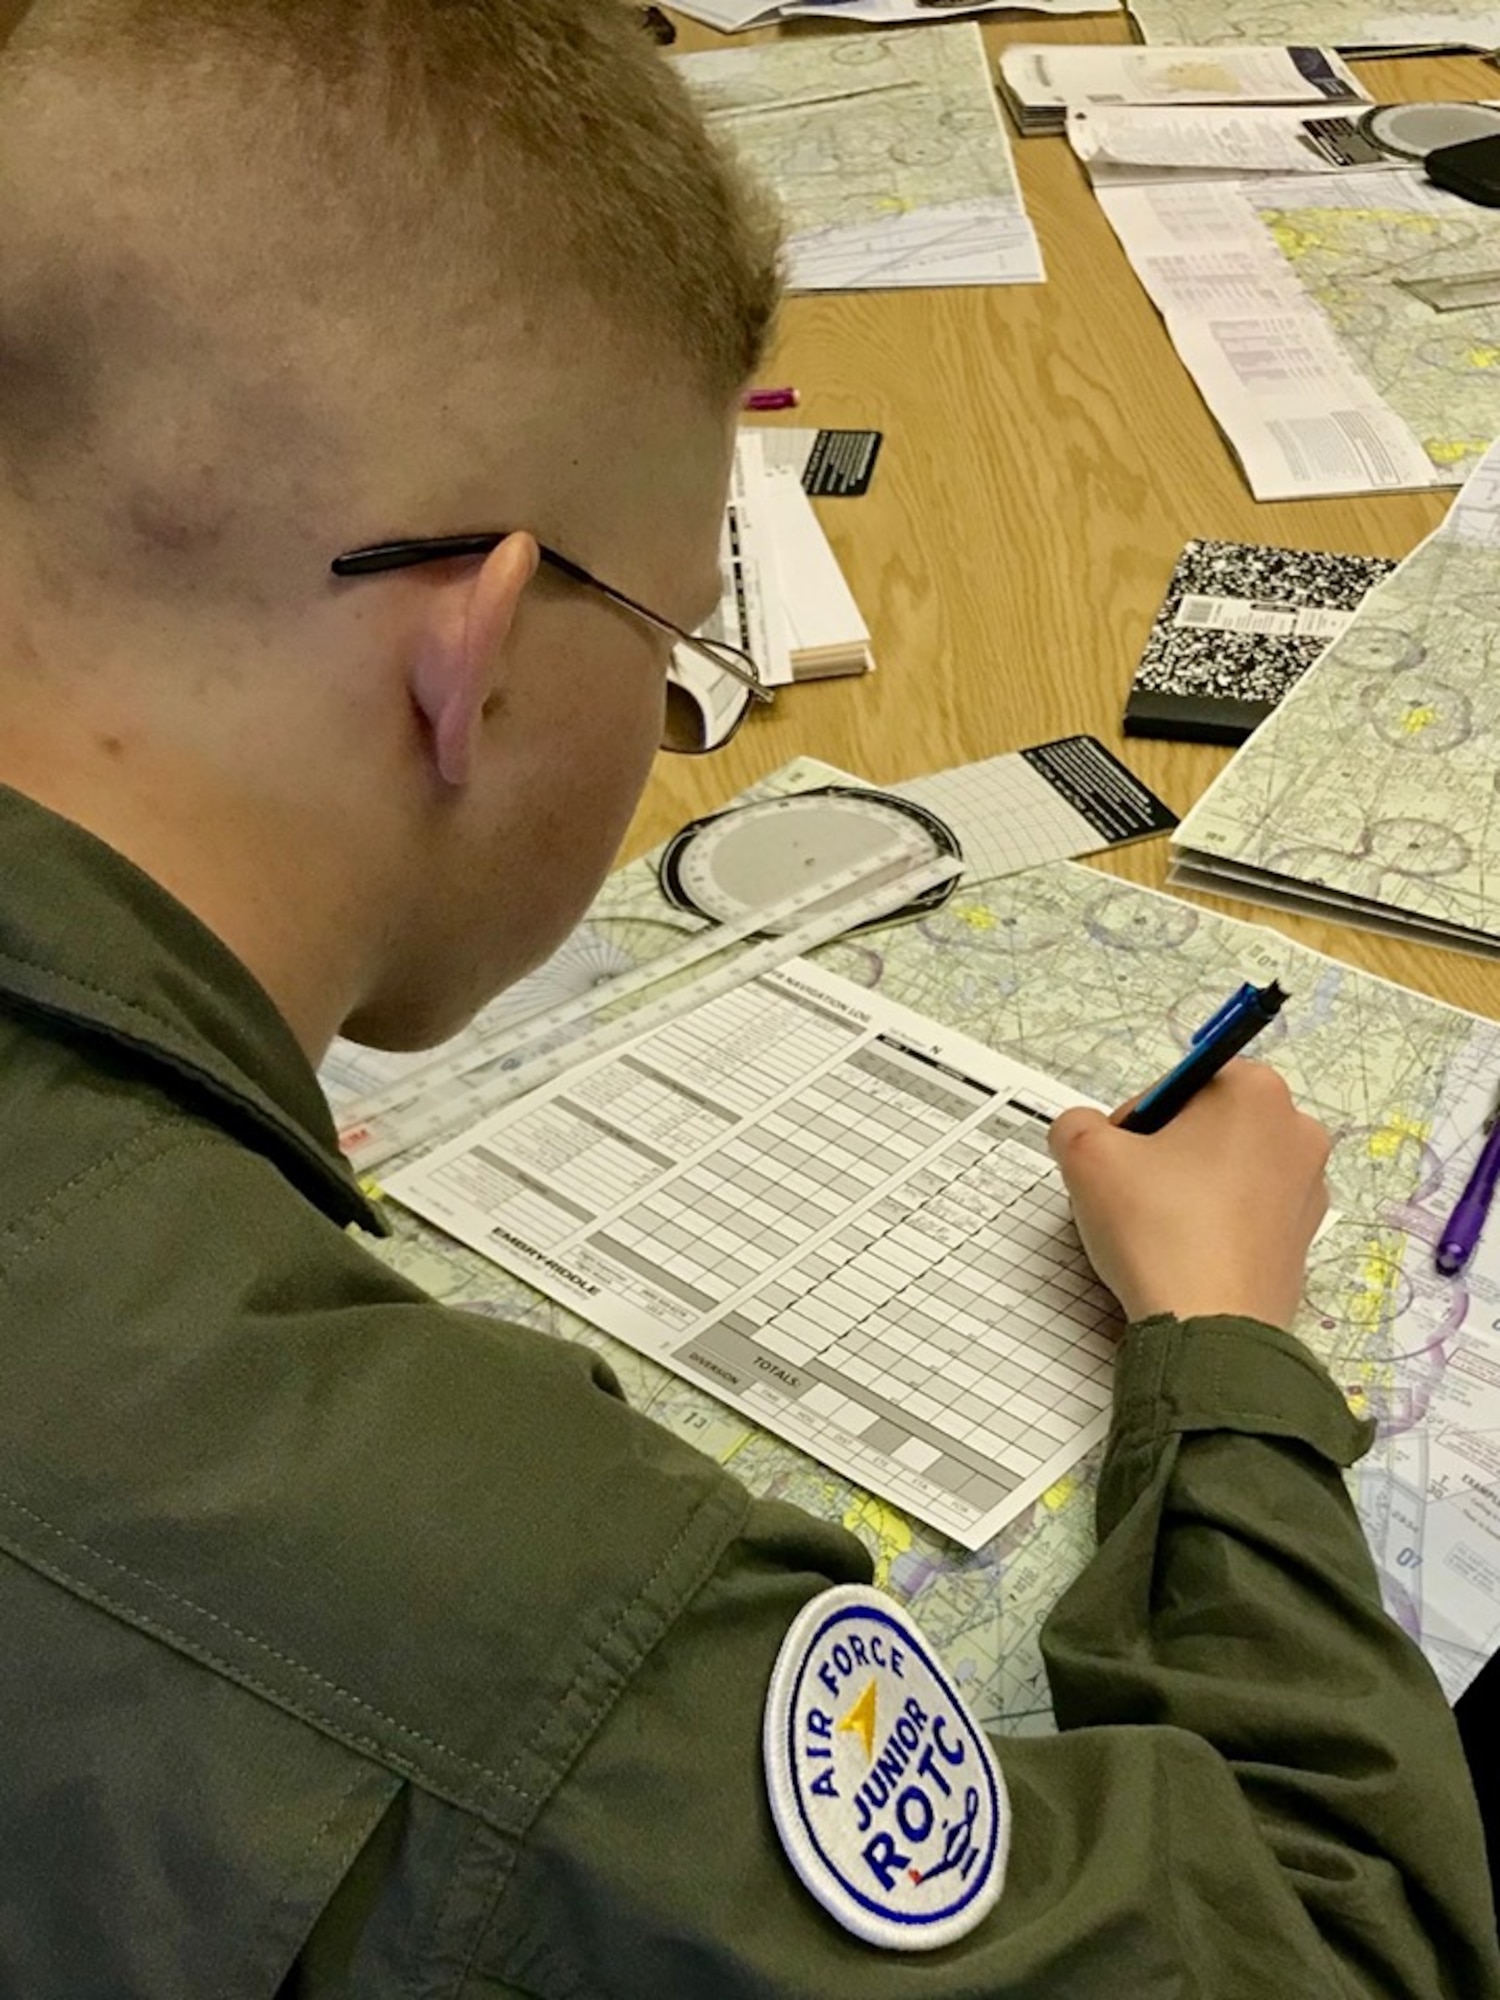 An Air Force Junior ROTC cadet at Southeastern University, Lakeland, Florida, focuses his attention on filing a flight plan as he participates in the Air Force JROTC Flight Academy.  The Flight Academy is a Chief of Staff of the Air Force Scholarship Program intended to expose high school students to the benefits of a career in aviation.  More than 1,560 cadets applied for one of the 150 scholarships each valued at approximately $20,000.  The cadets were competitively boarded to ensure only the most qualified cadets were sent to the partner universities.